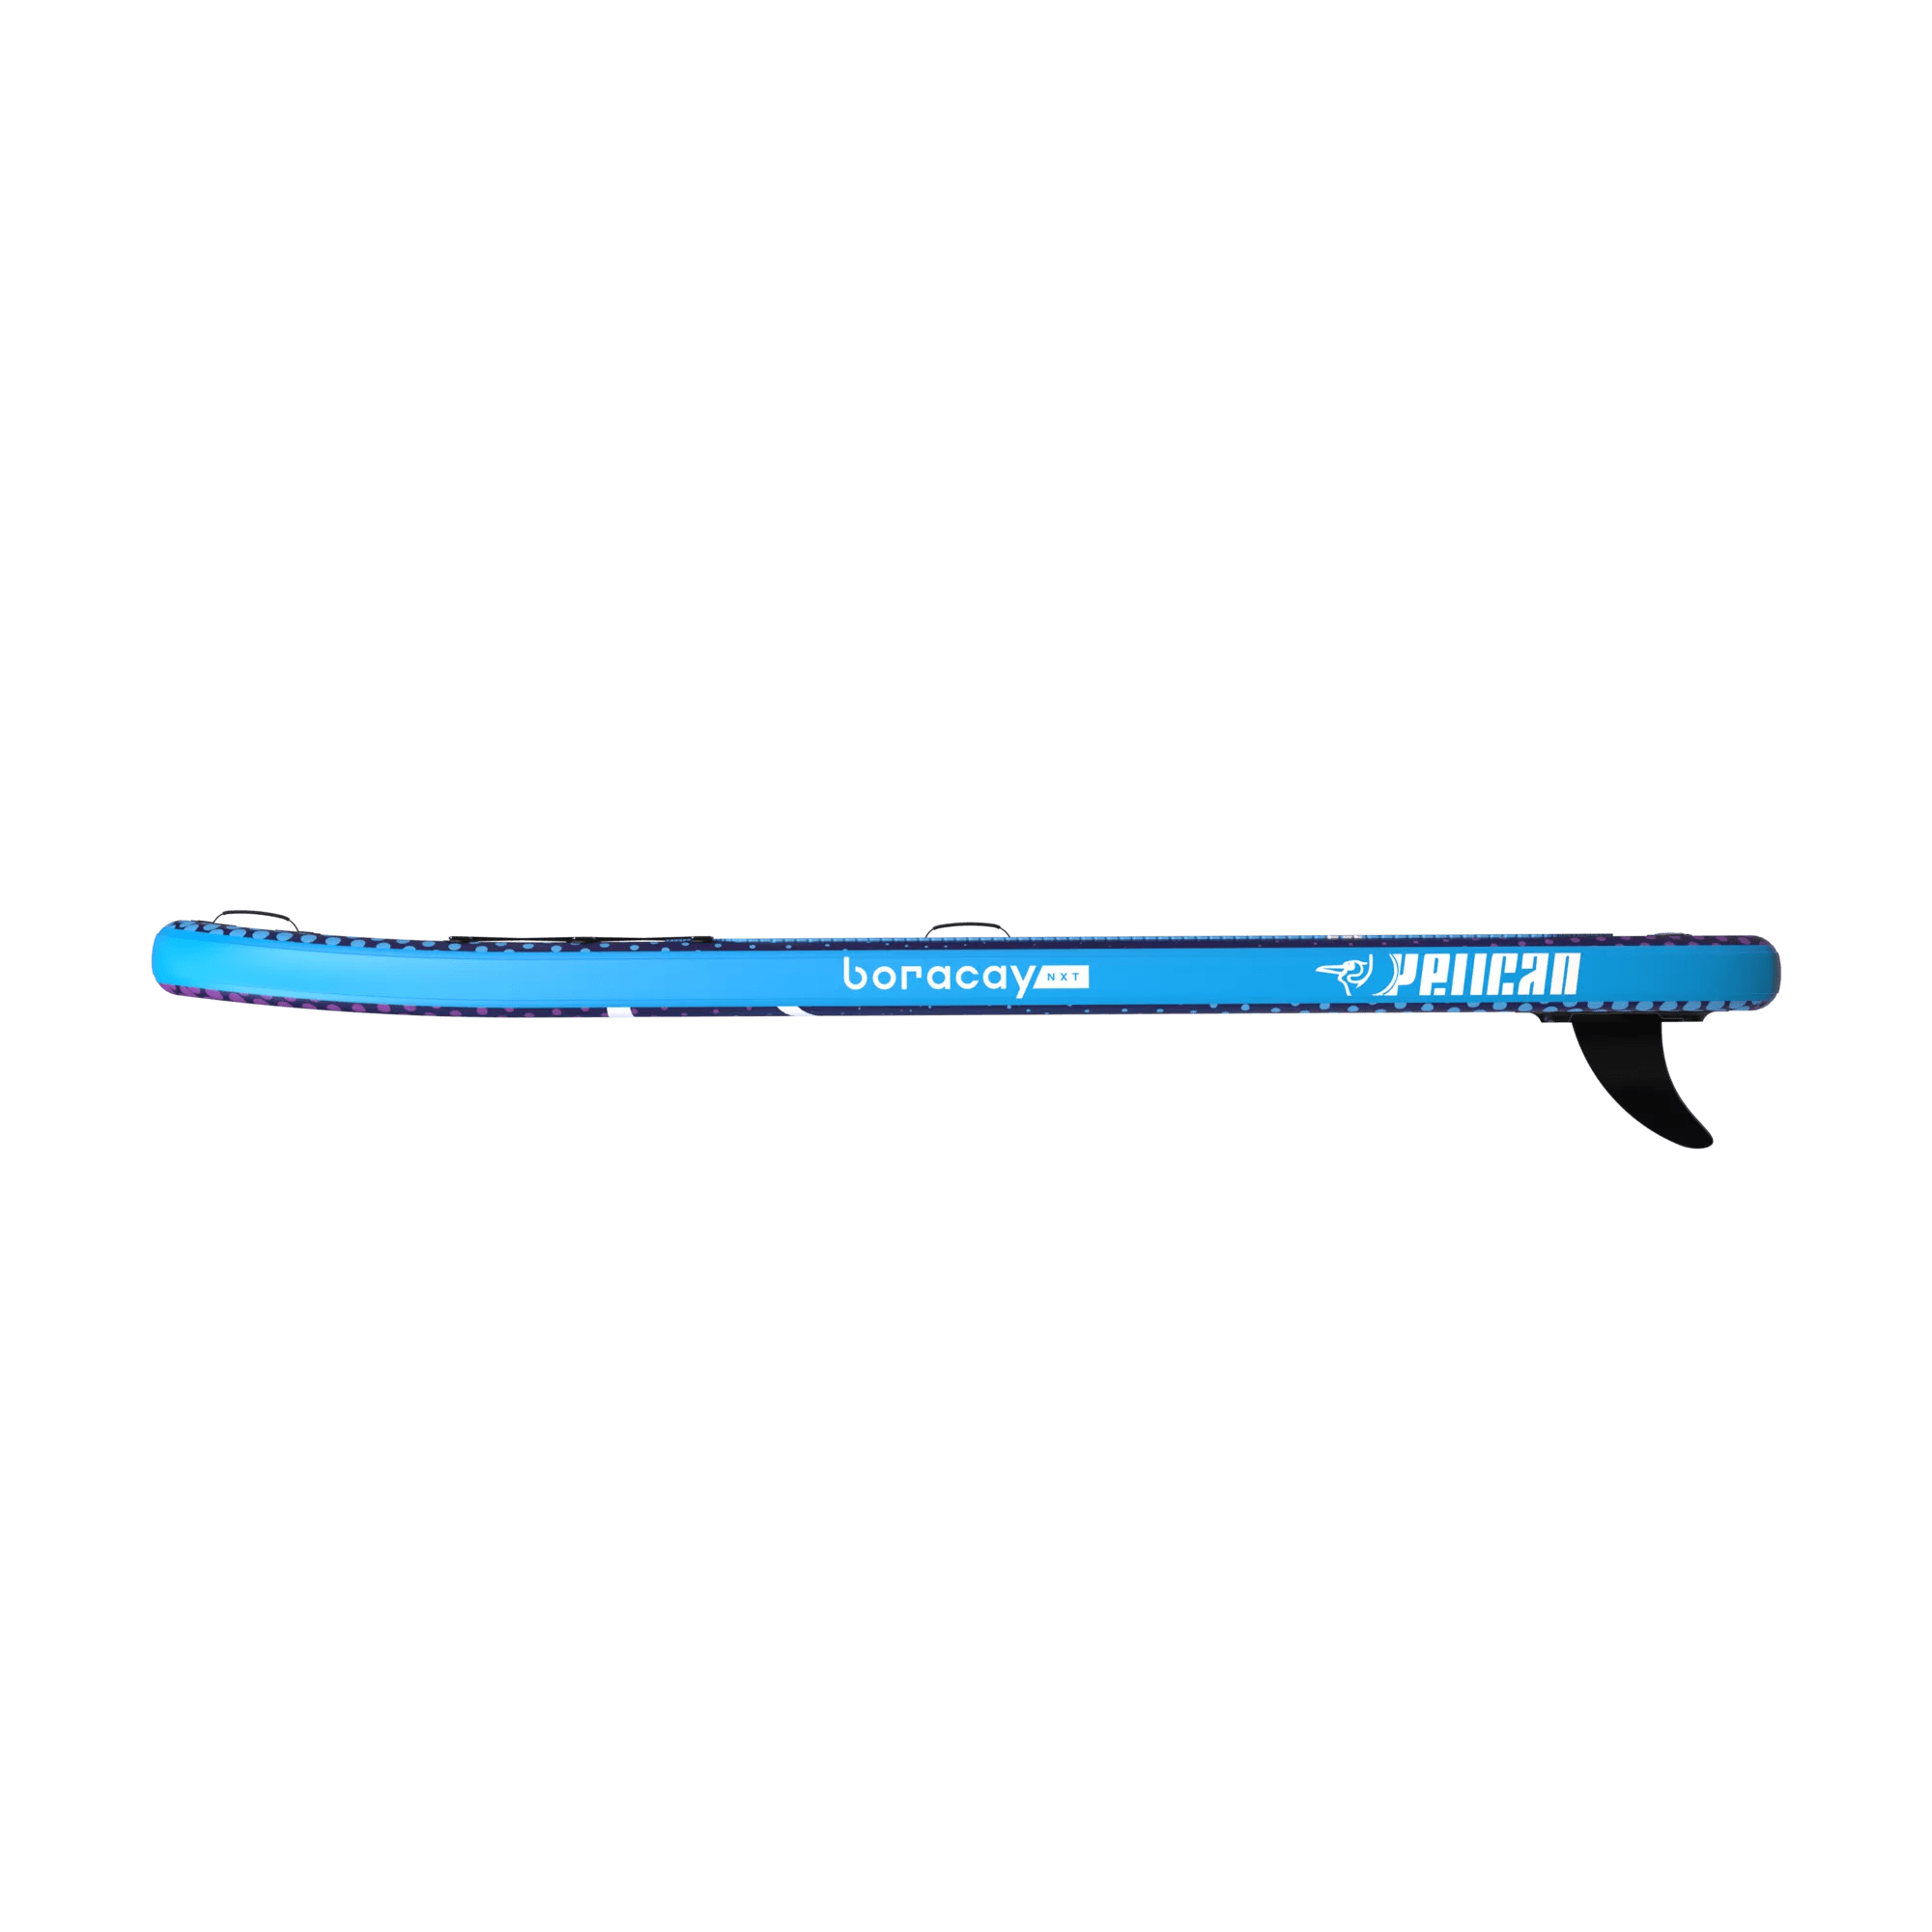 PELICAN - Boracay NXT 10'4" Inflatable Paddle Board -  - FJG10P203 - SIDE